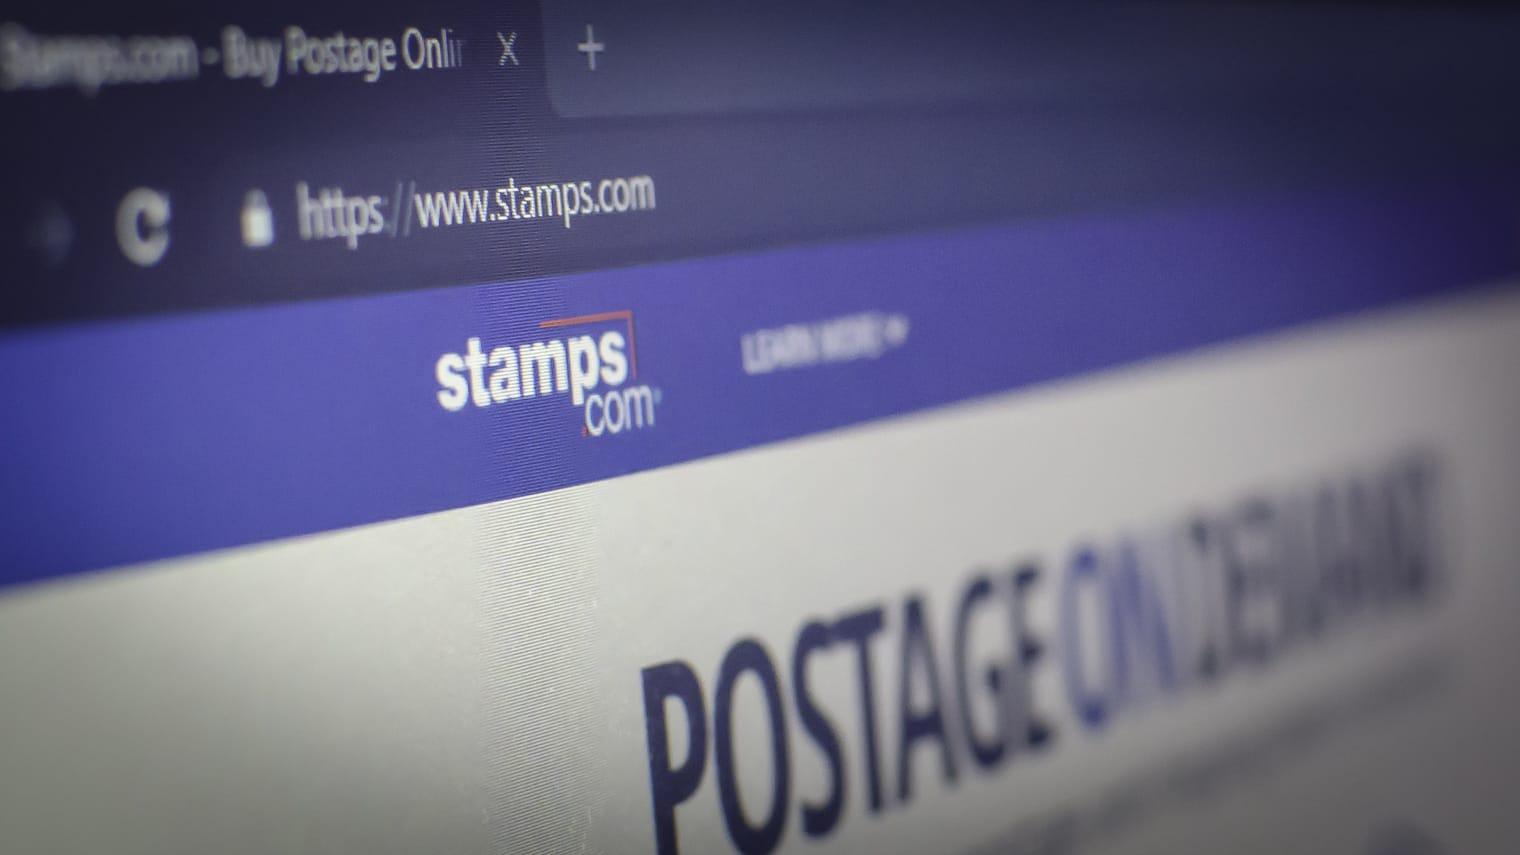 Stamps.com Logo - Spurned by USPS' denial to end exclusivity agreement, Stamps.com